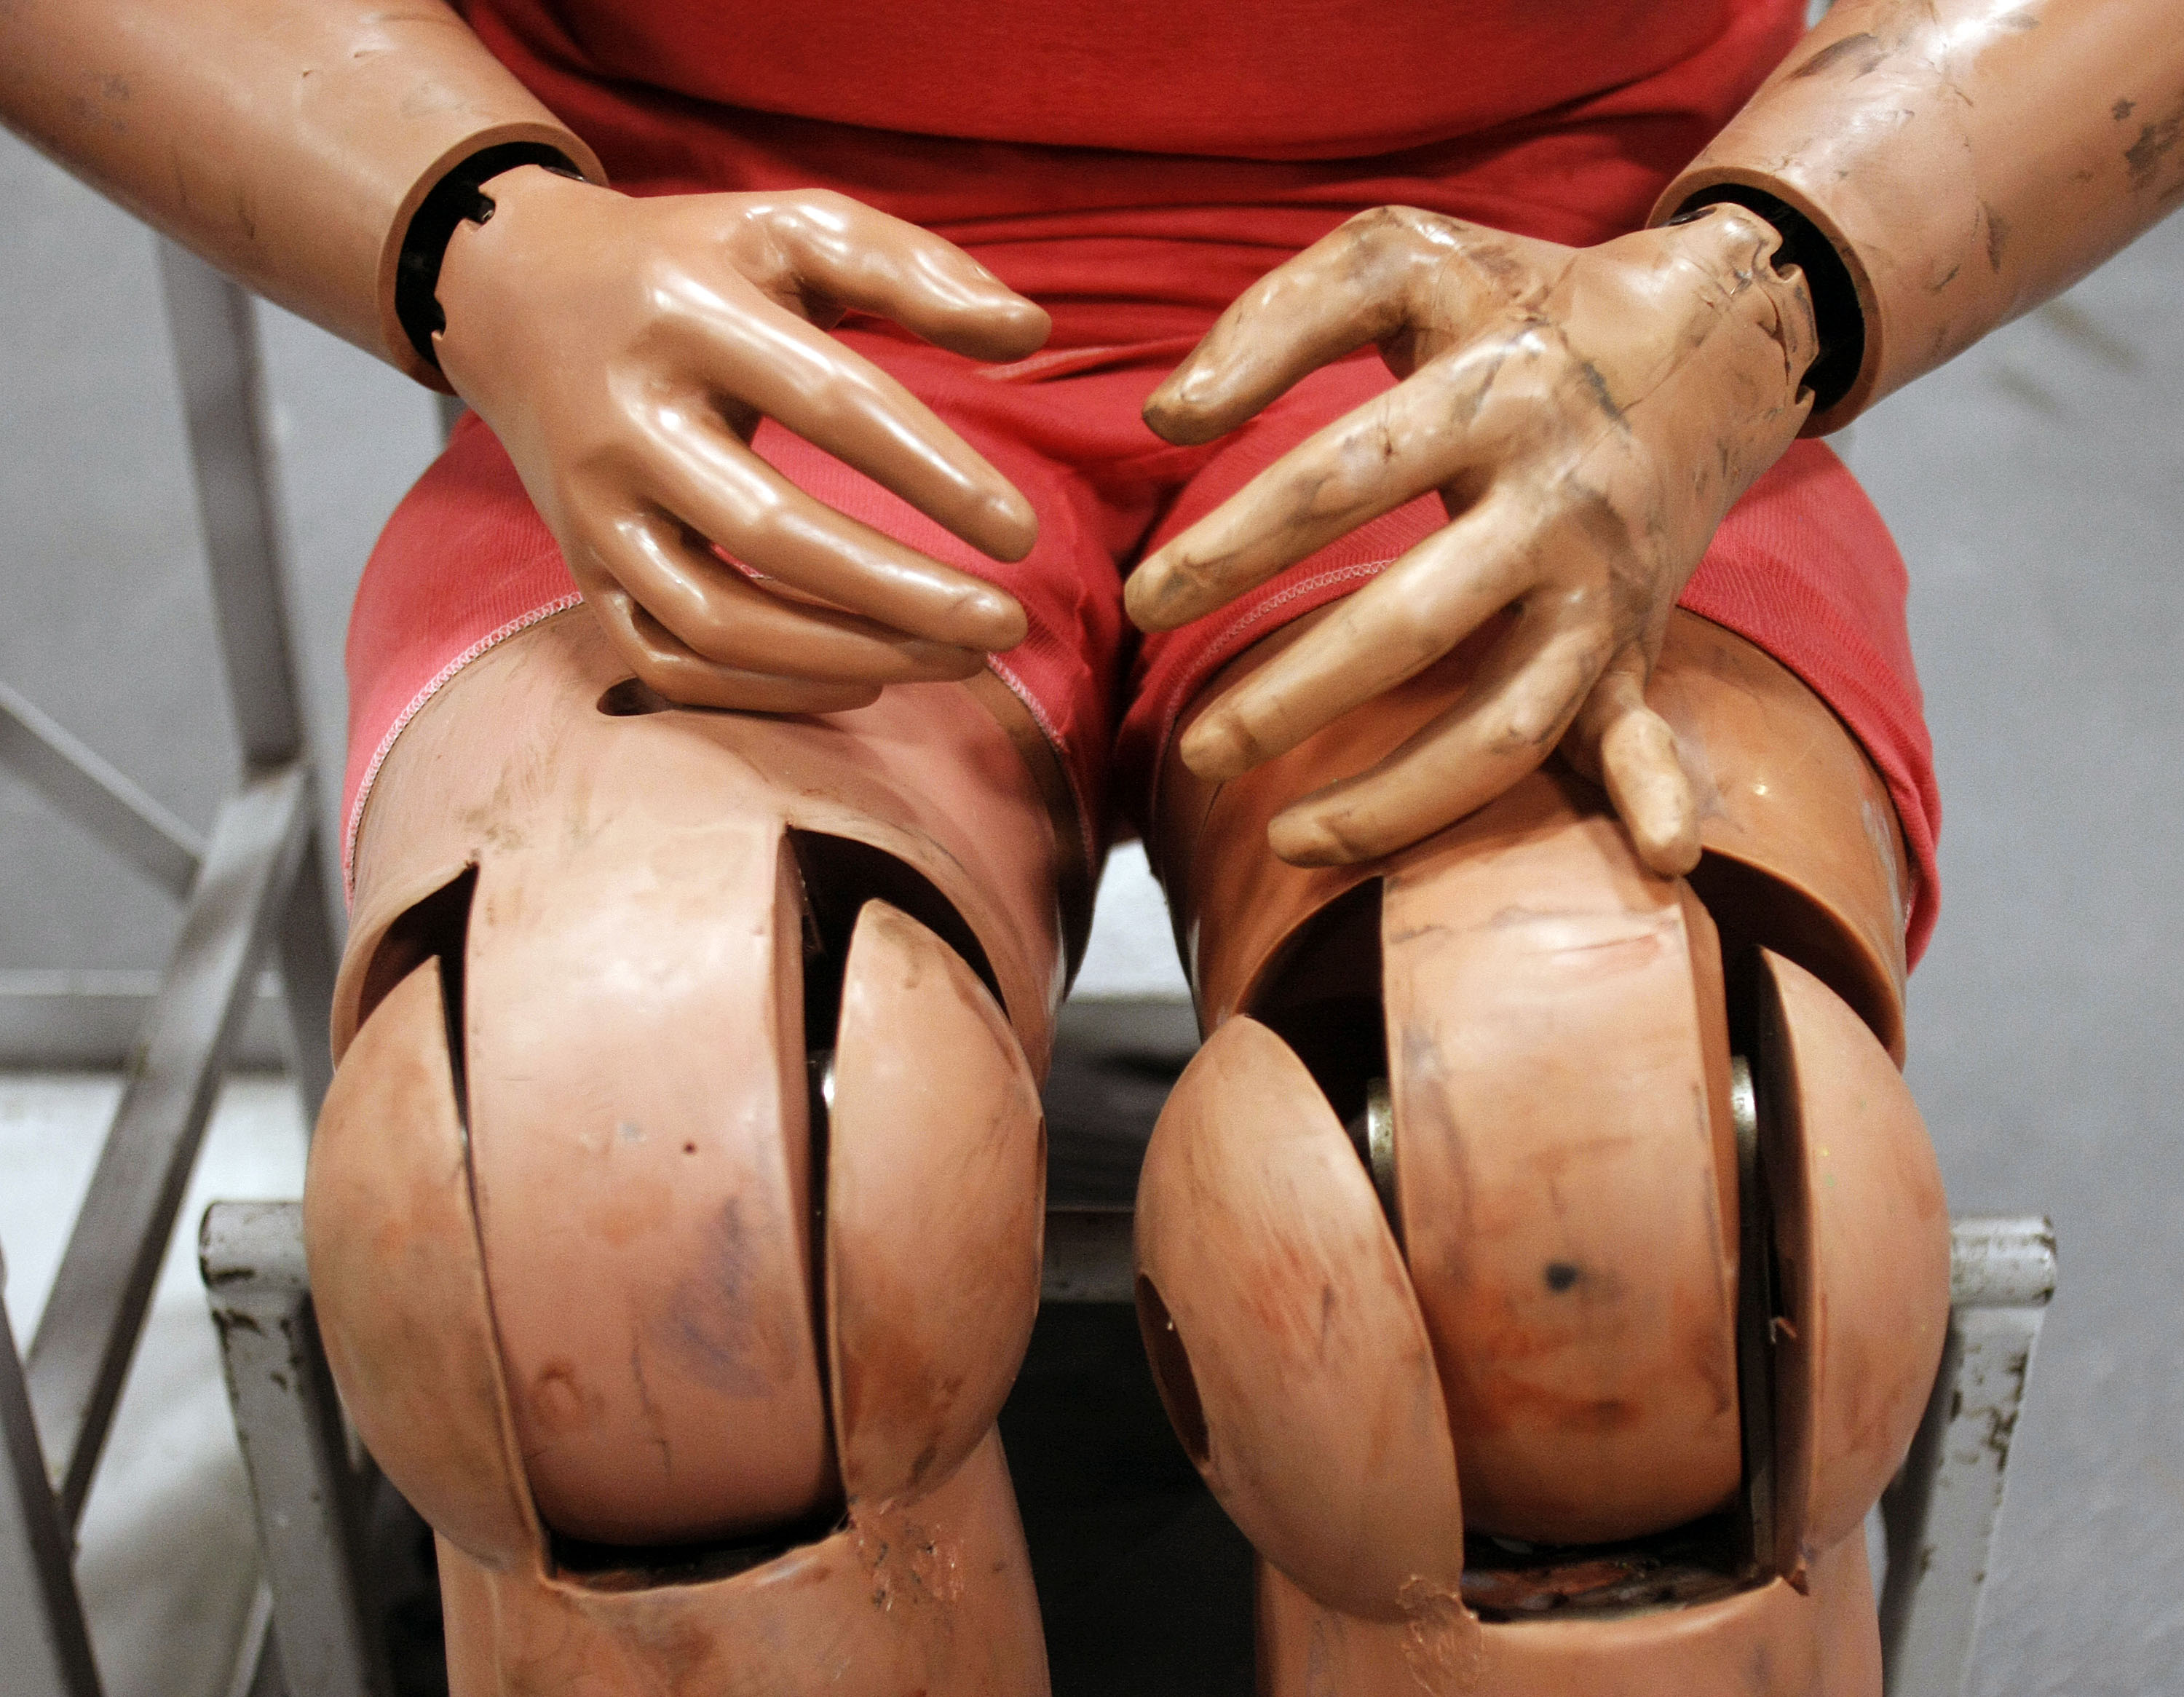 A Ford crash test dummy is shown at the Crash Barrier Dearborn Development Center March 10, 2014 in Dearborn, Michigan. (Bill Pugliano—Getty Images)